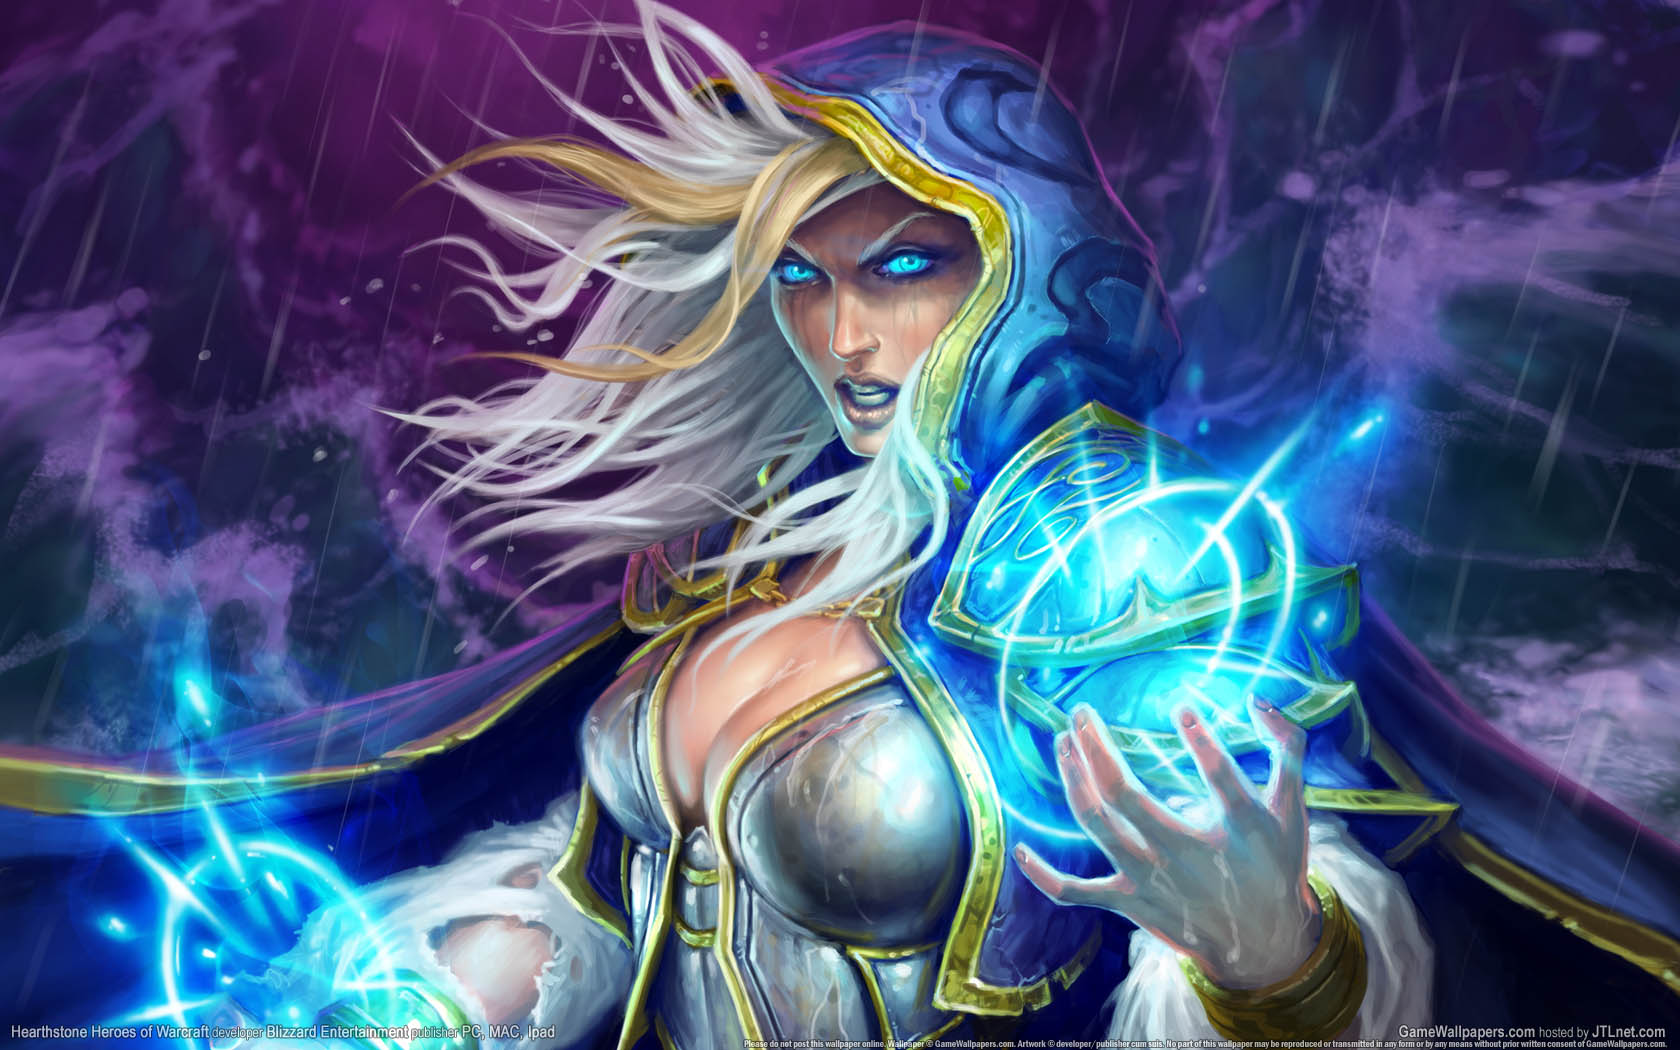 Hearthstone%3A Heroes of Warcraft wallpaper 03 1680x1050